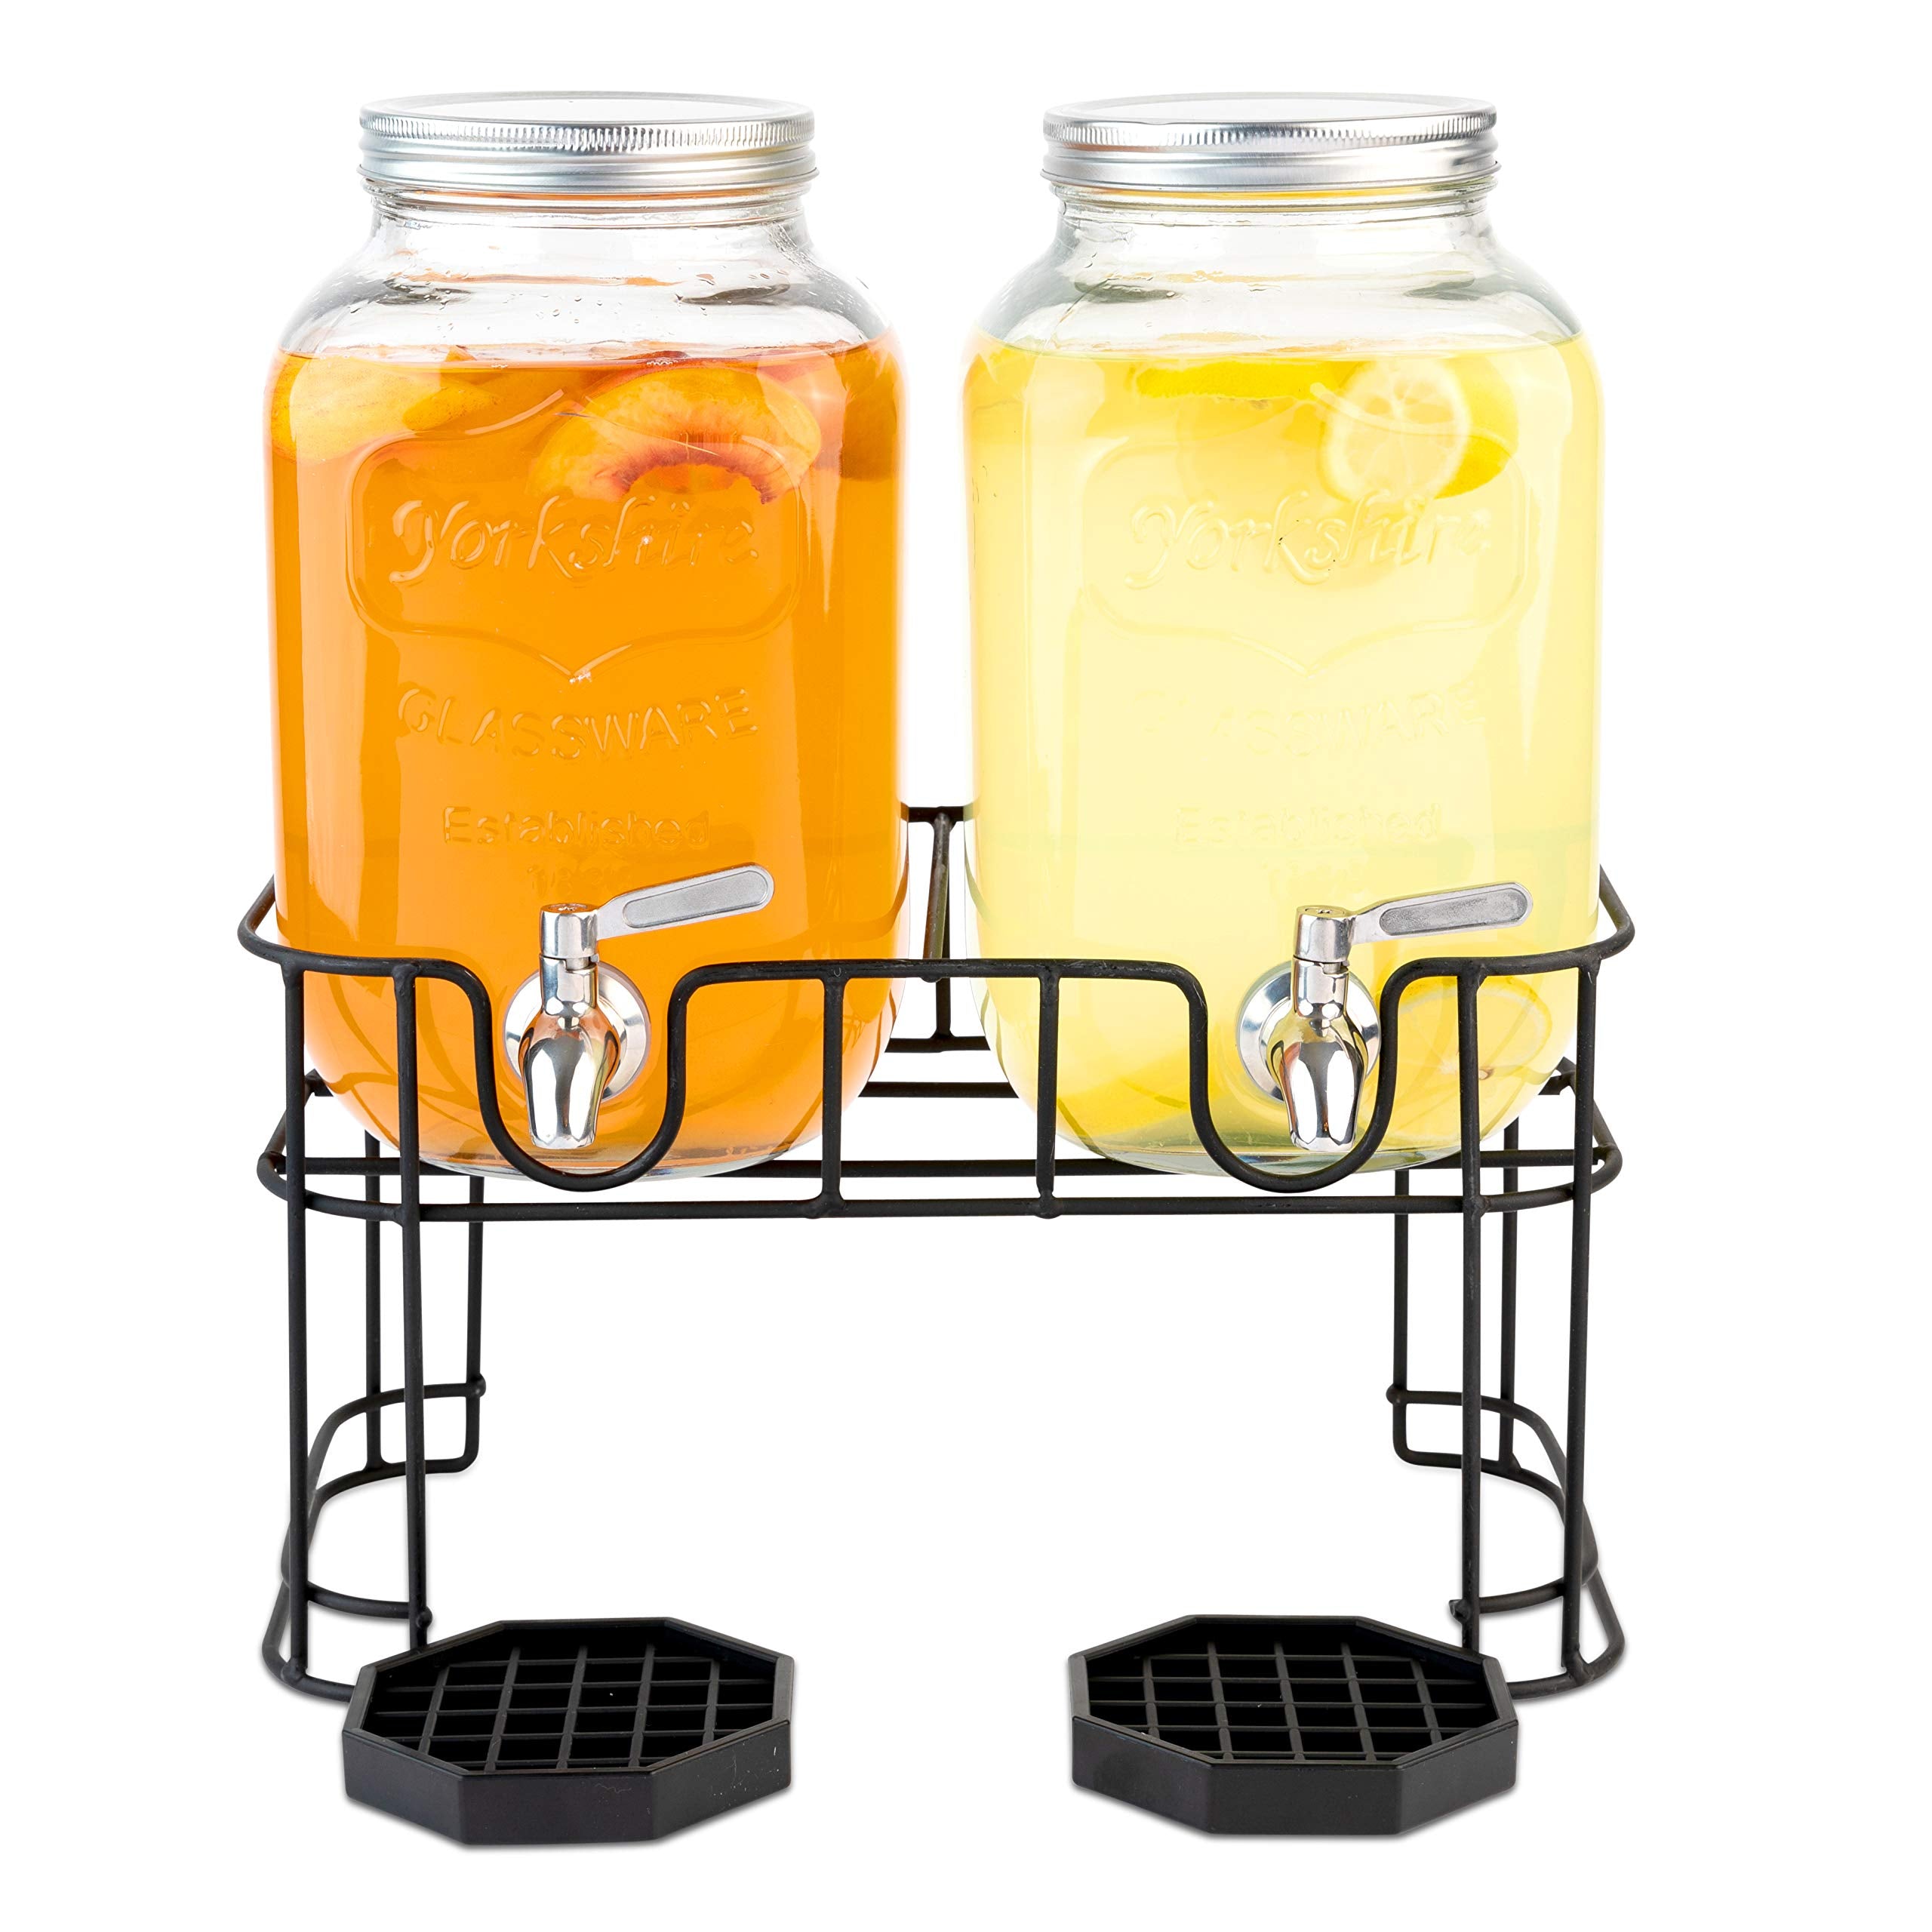 Dual Gallon Glass Beverage Dispensers with Metal Stand, Stainless Steel Spigot, Metal Lid and Drip Trays- Gallon Glass Yorkshire Mason Container for Kombucha Fermenting, Iced Tea and more  - Like New